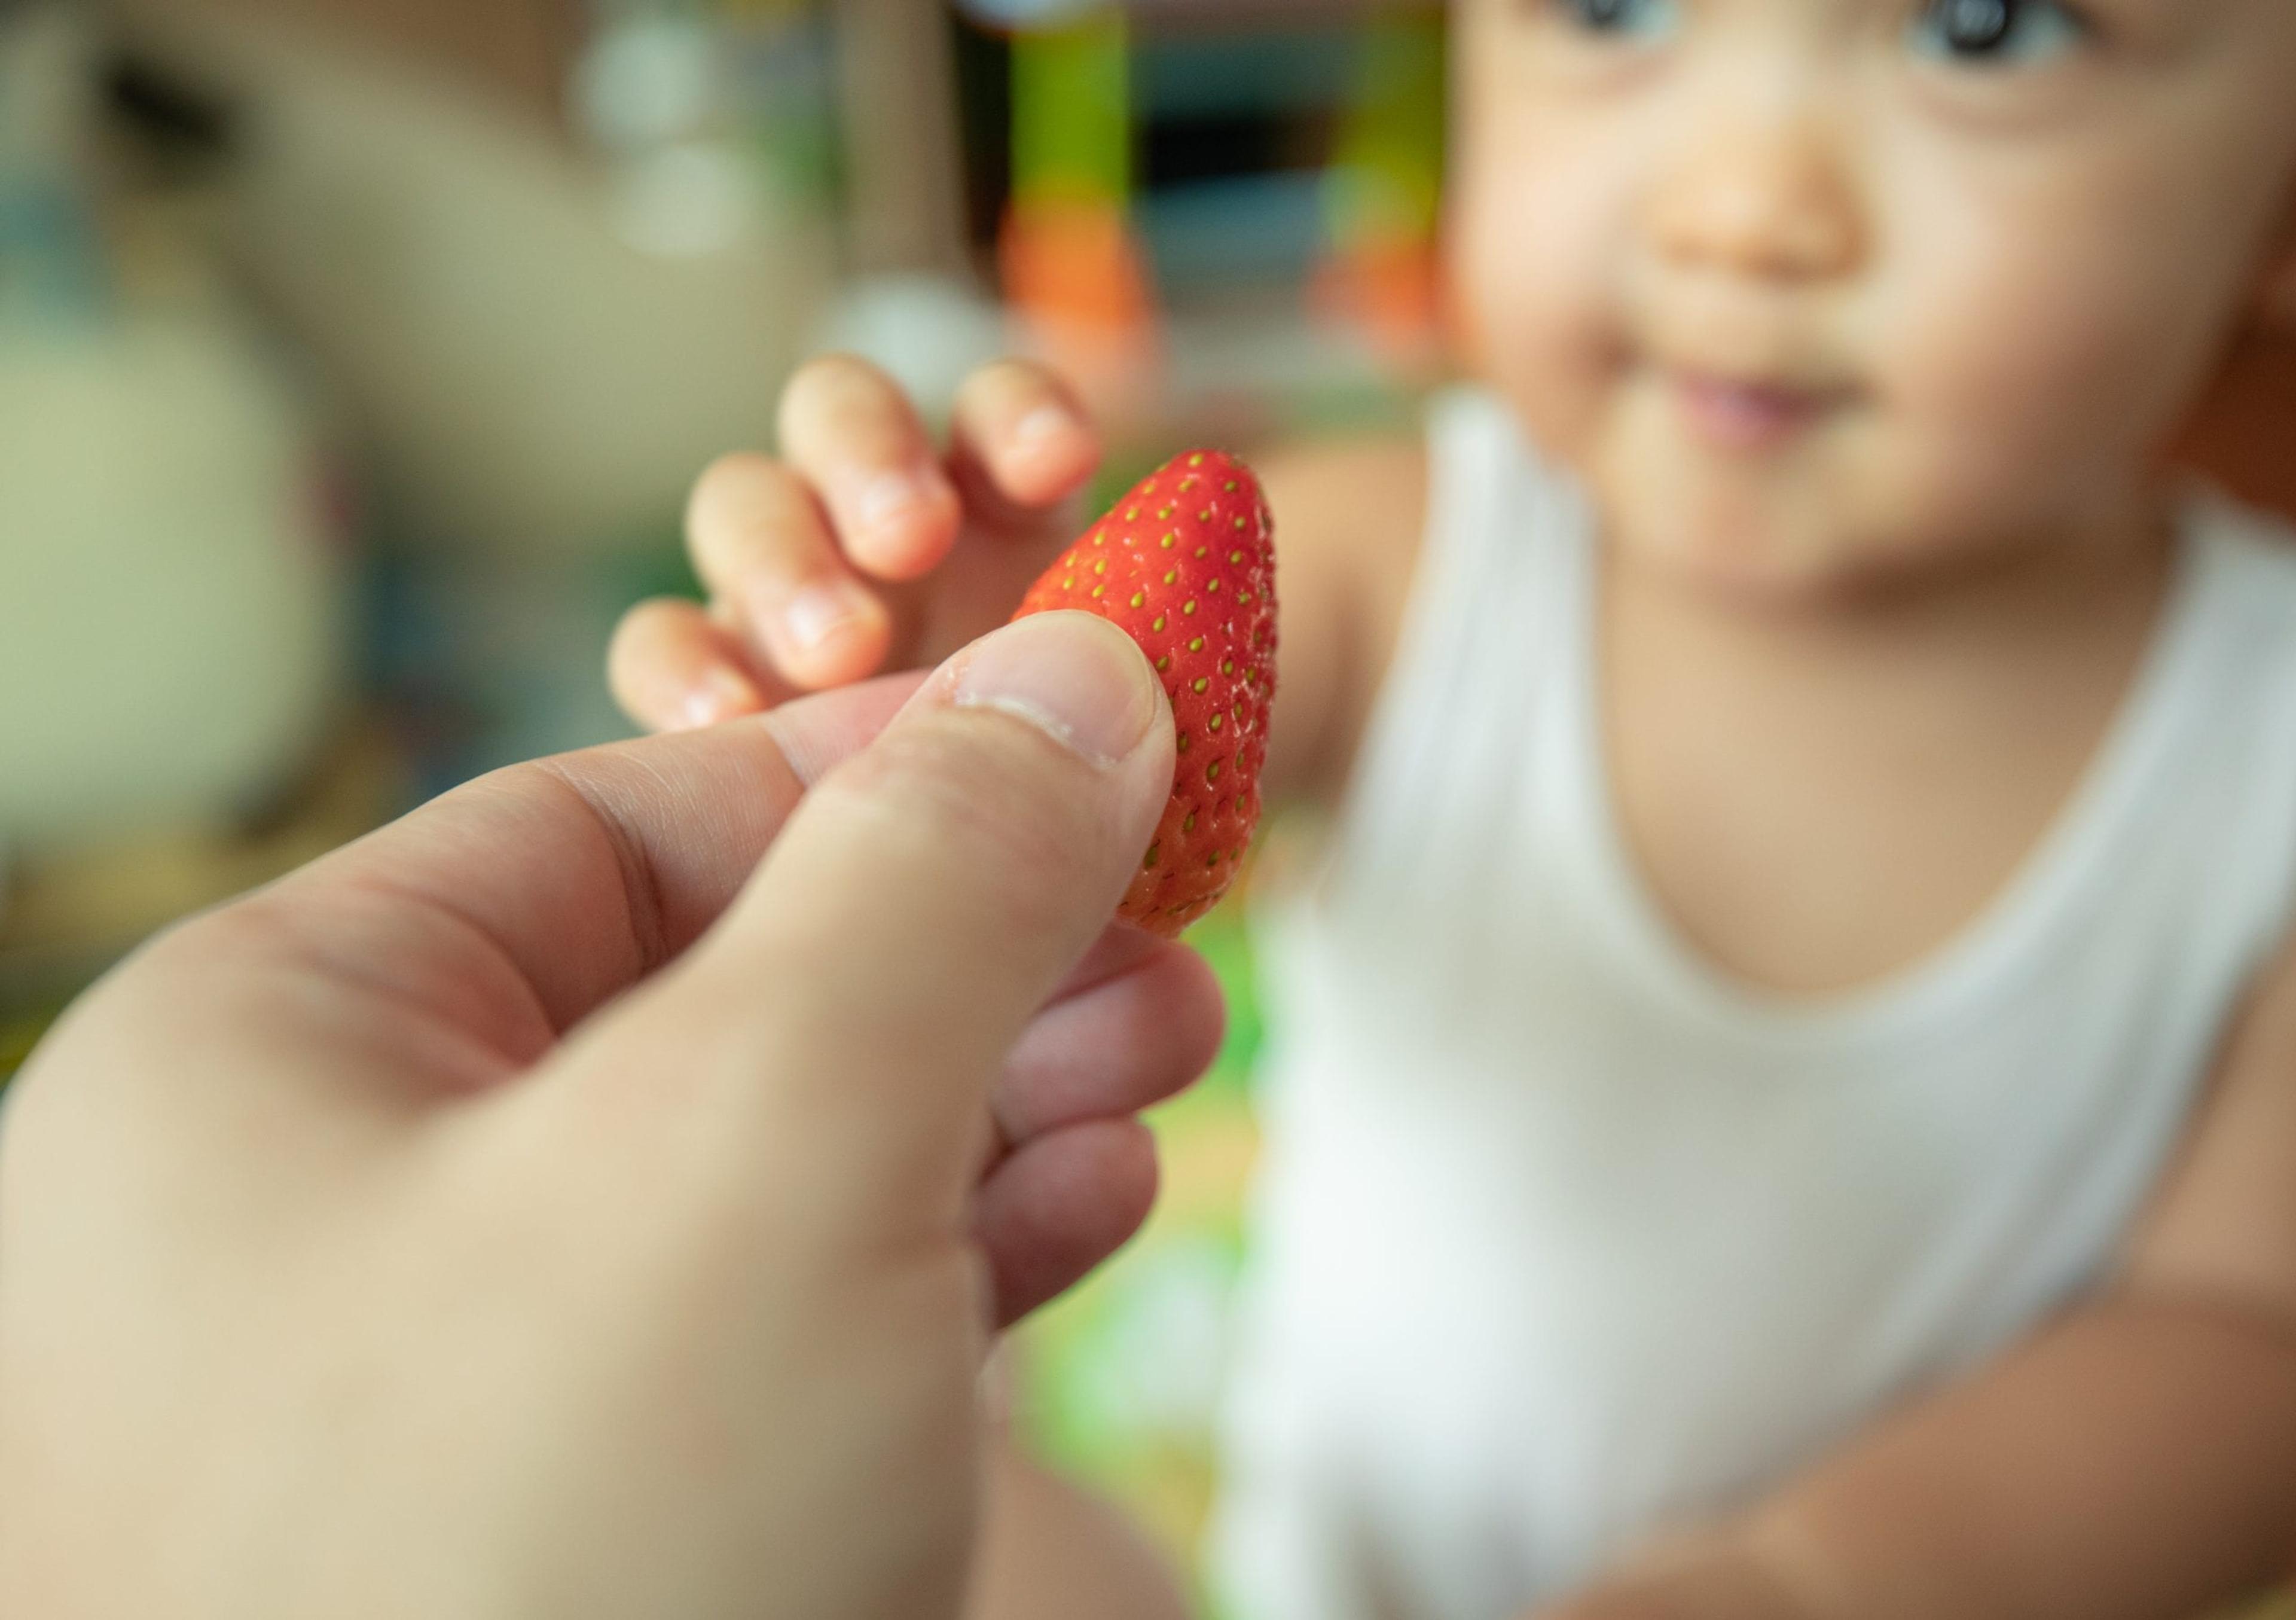 Little child reaching for a strawberry